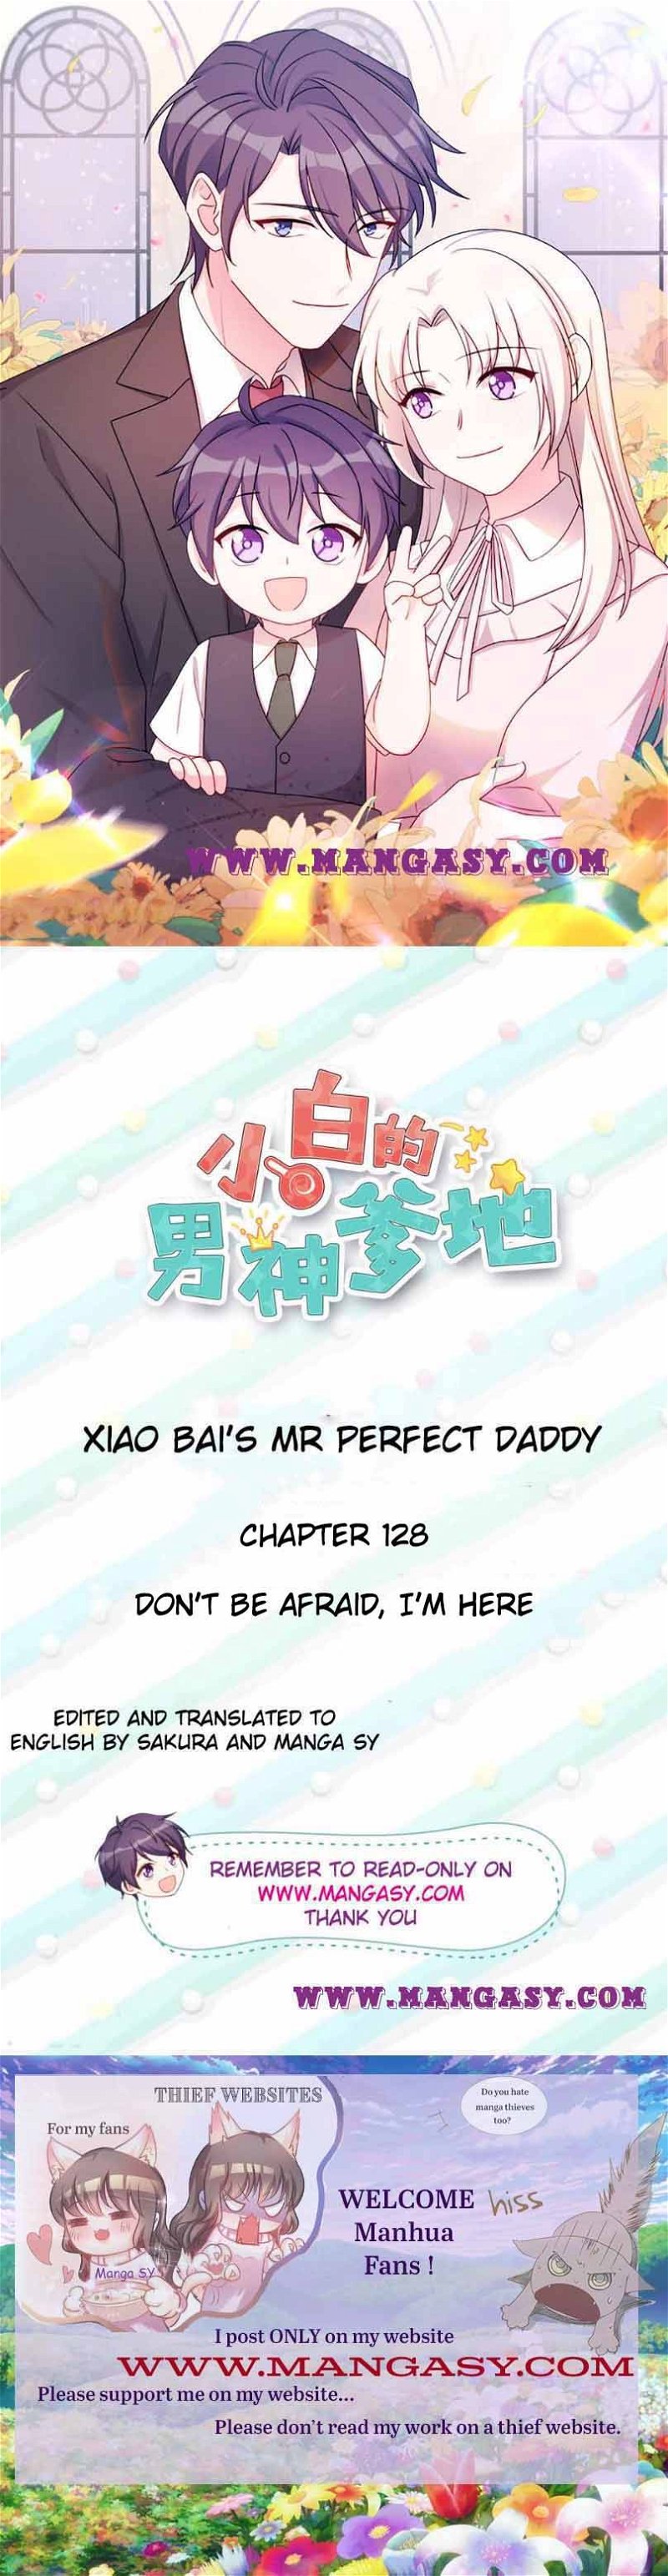 Xiao Bai’s father is a wonderful person Chapter 128 - Page 0